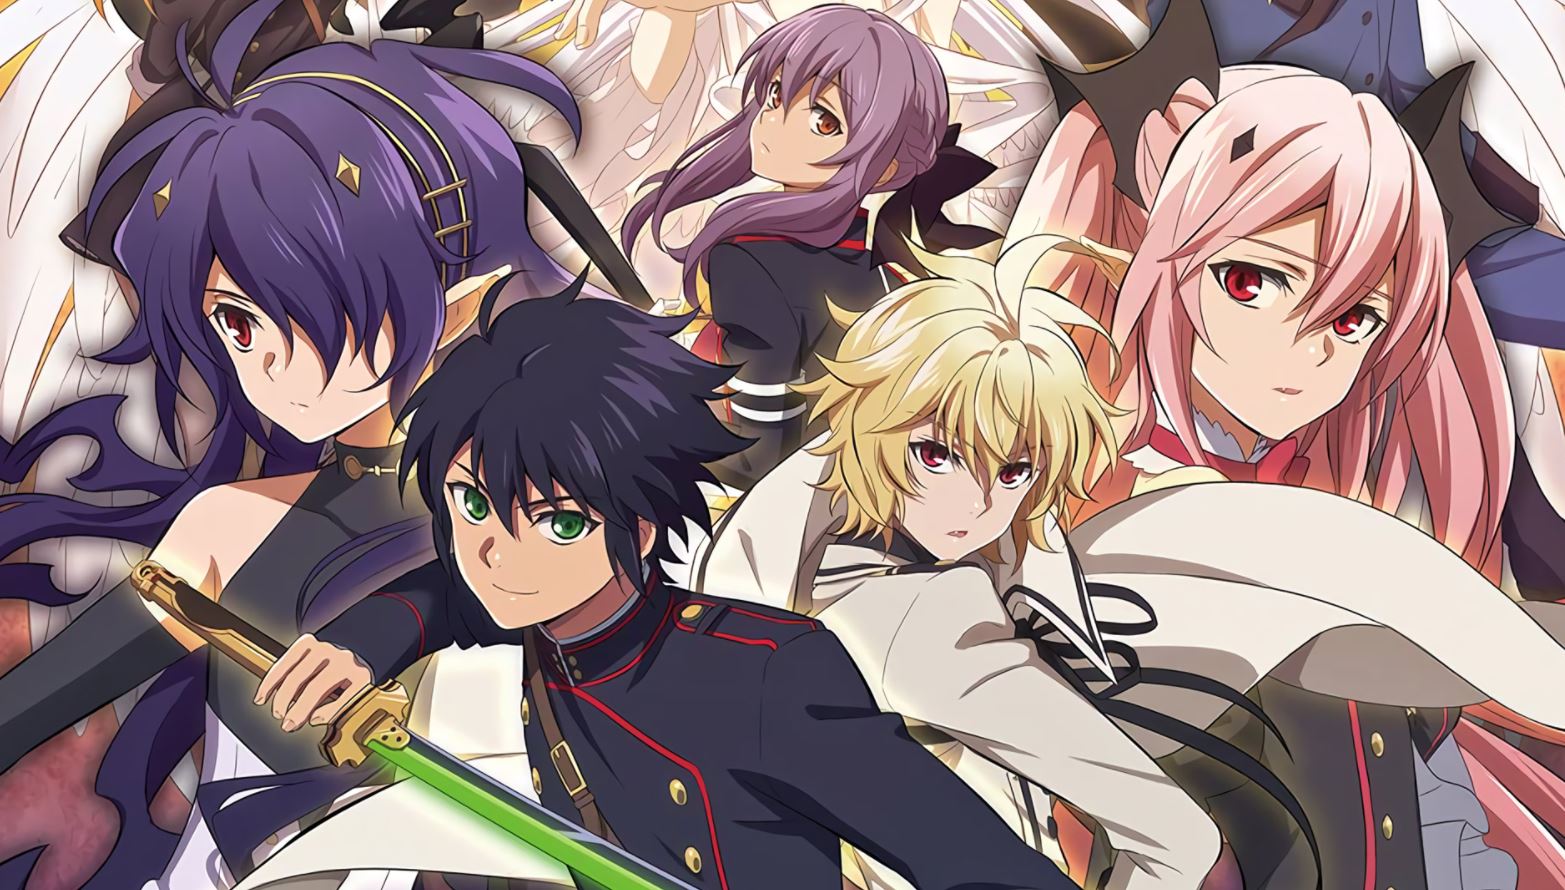 Seraph of the End: Battle in Nagoya